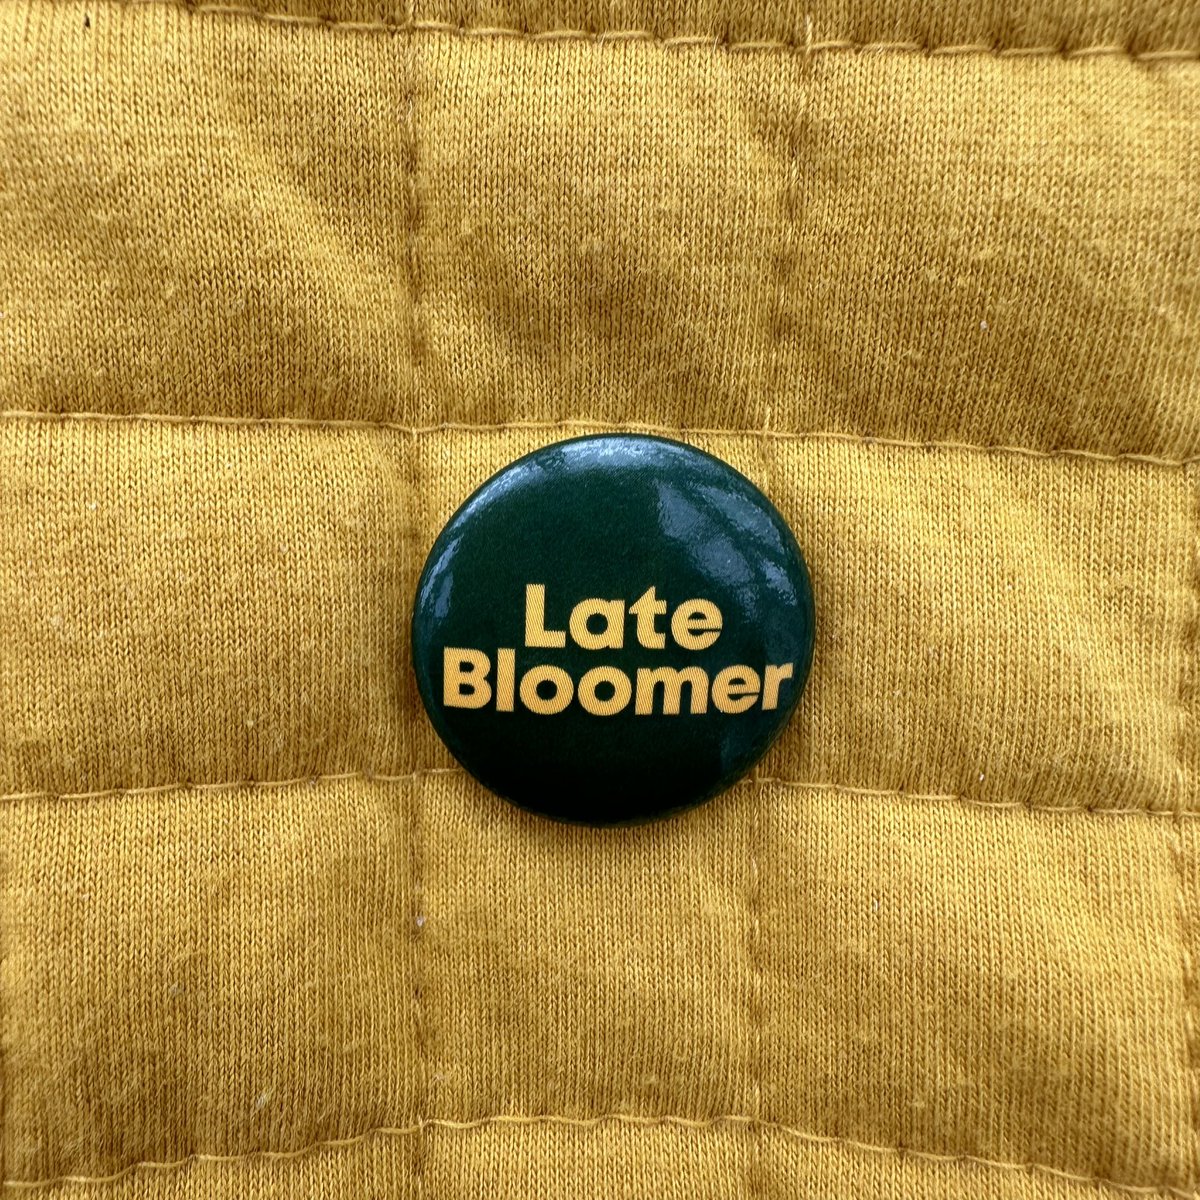 Thank you to everyone who has been to see Late Bloomer so far. I’m 118 shows in and loving it. Up next is another 100 shows in the UK, Ireland and other parts of Europe. Then next year is Australia, New Zealand, Canada, USA and some more parts of Europe. (Join my mailing list via…